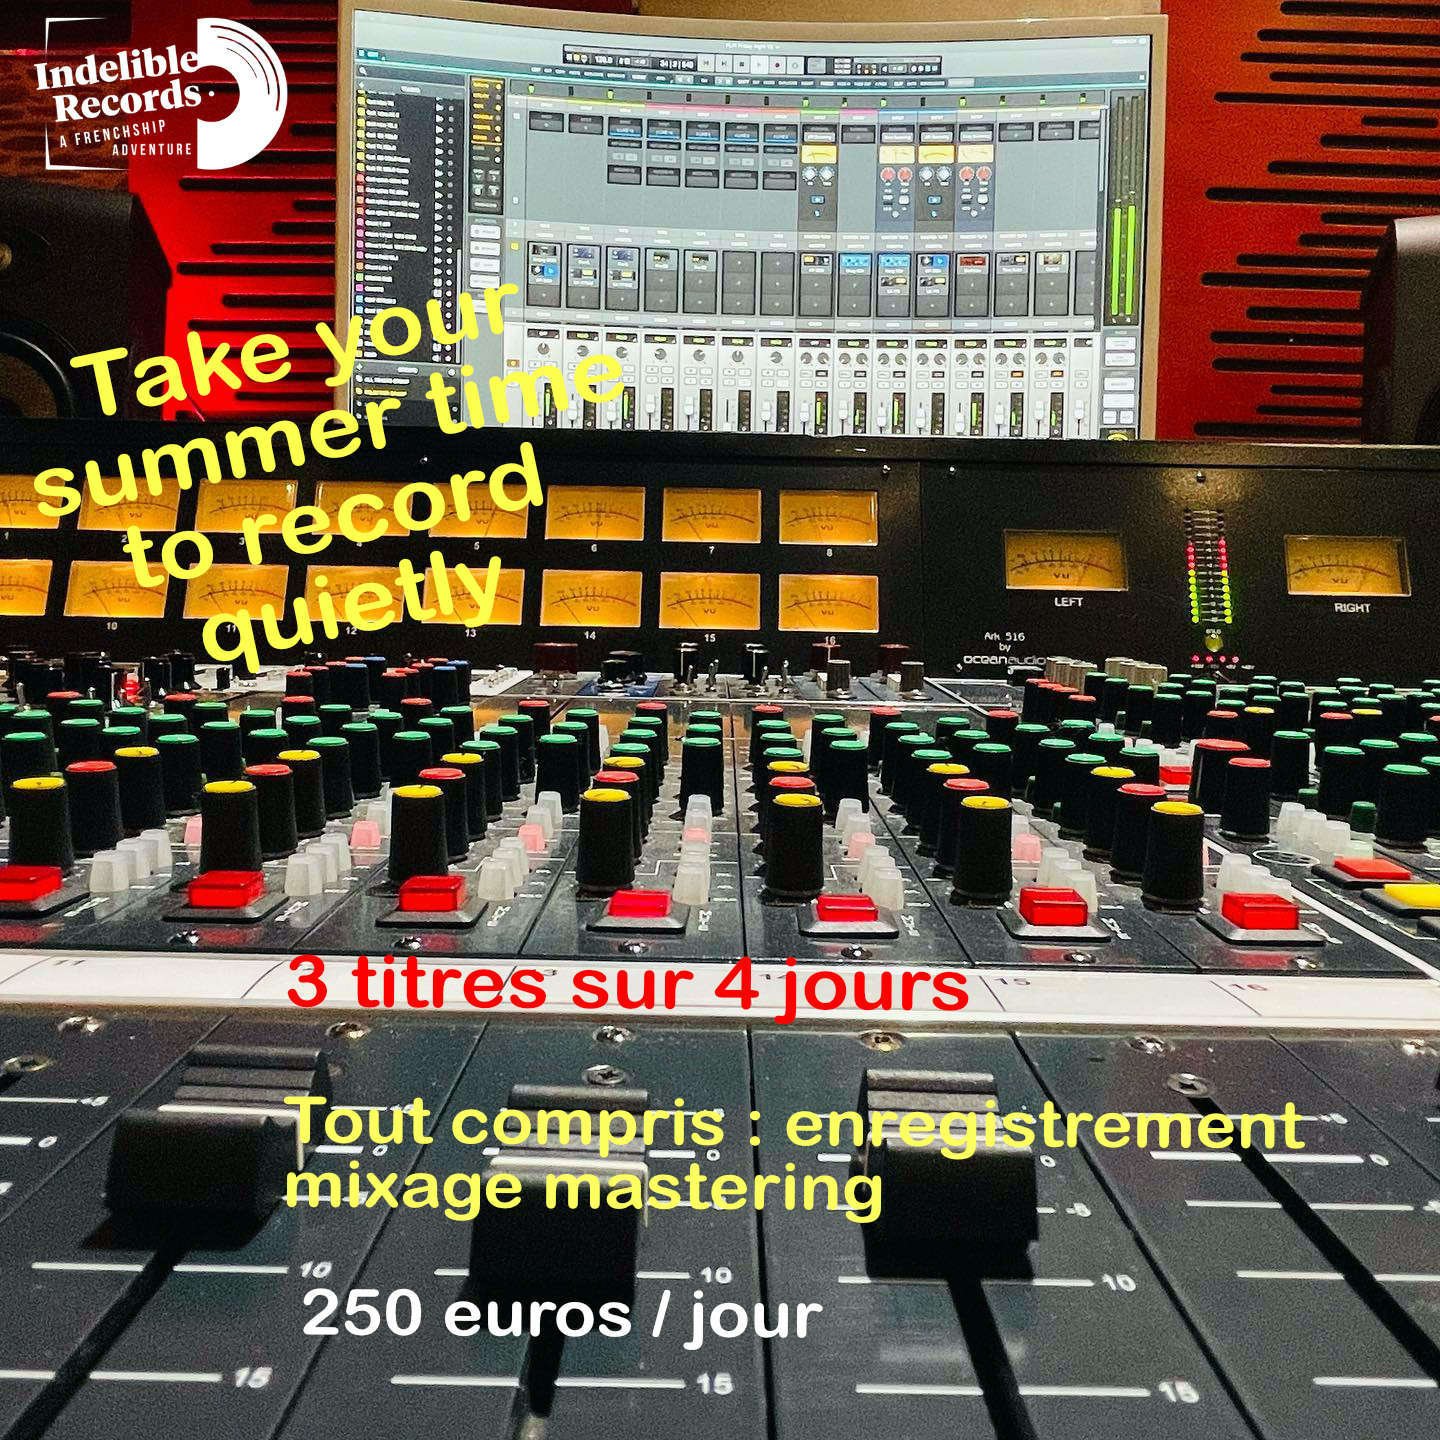 Take your summer time to record your songs